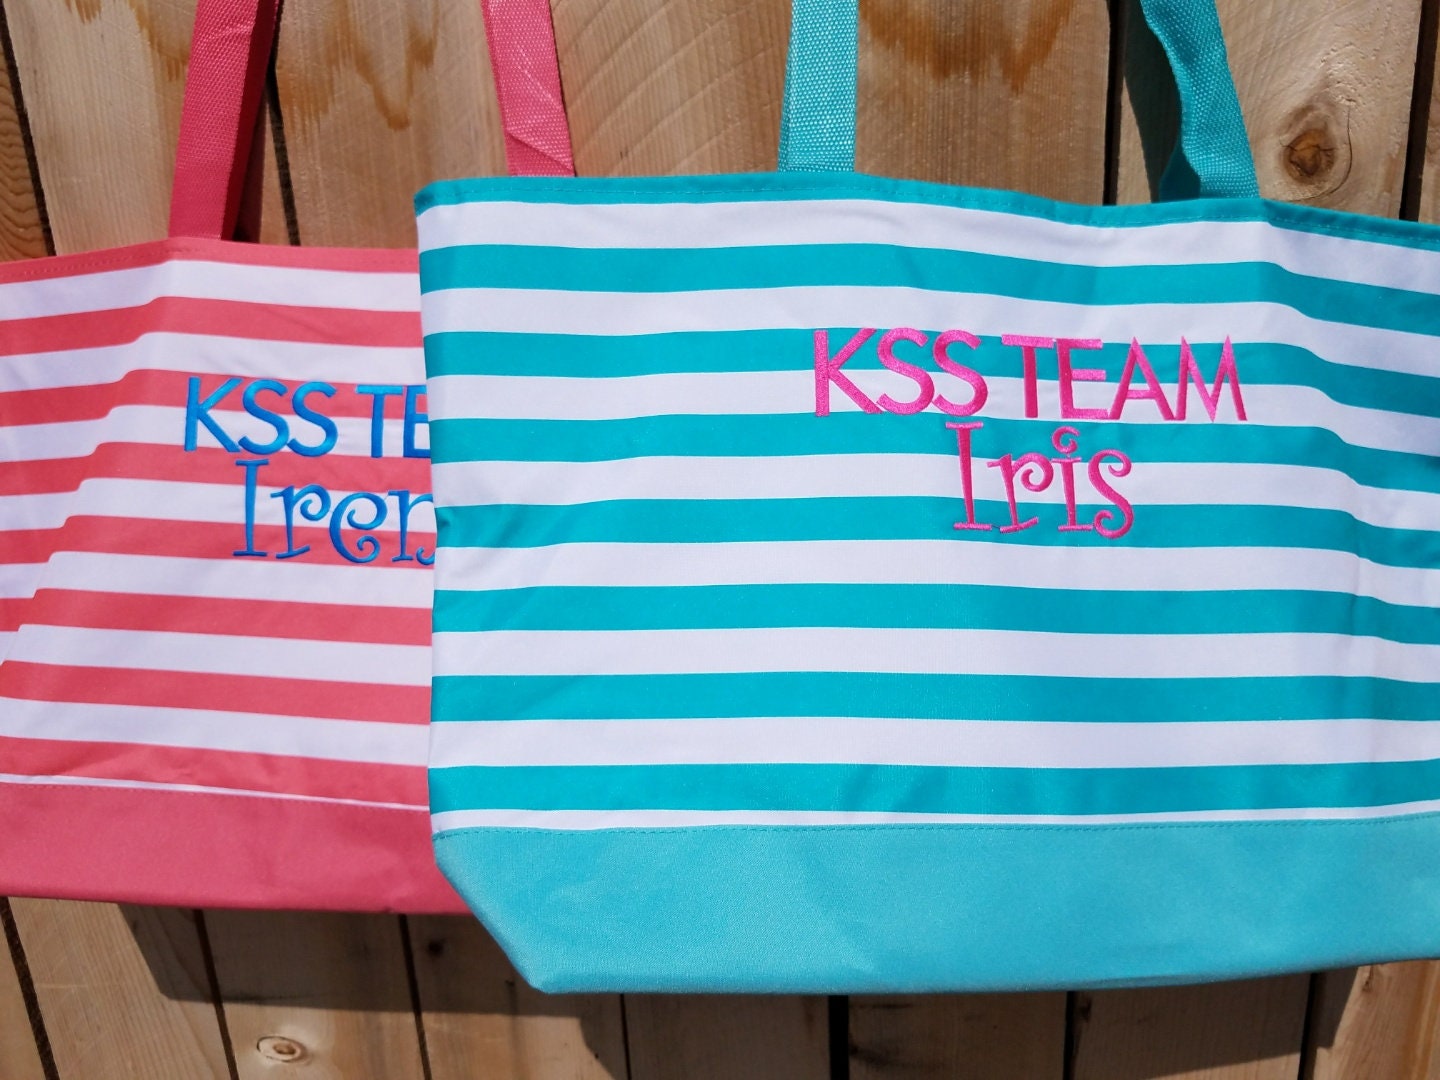 23 Large Turquoise Stripe Tote Bag Beach Bag With | Etsy